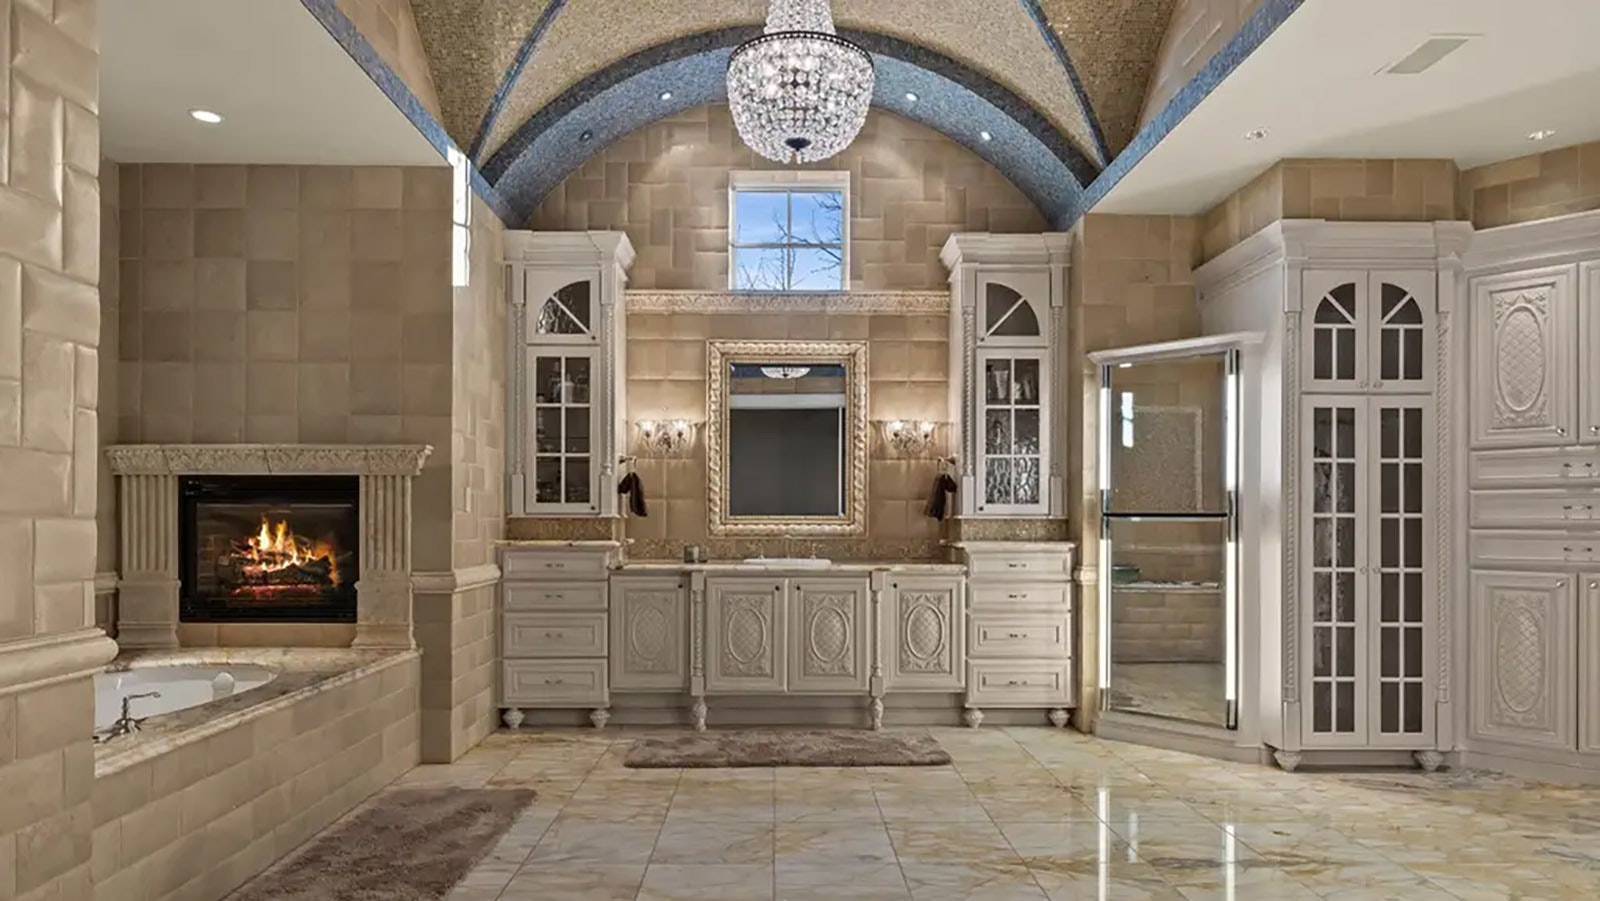 The master bathroom is large with double vanities, a fireplace above the bathtub and marble floors.